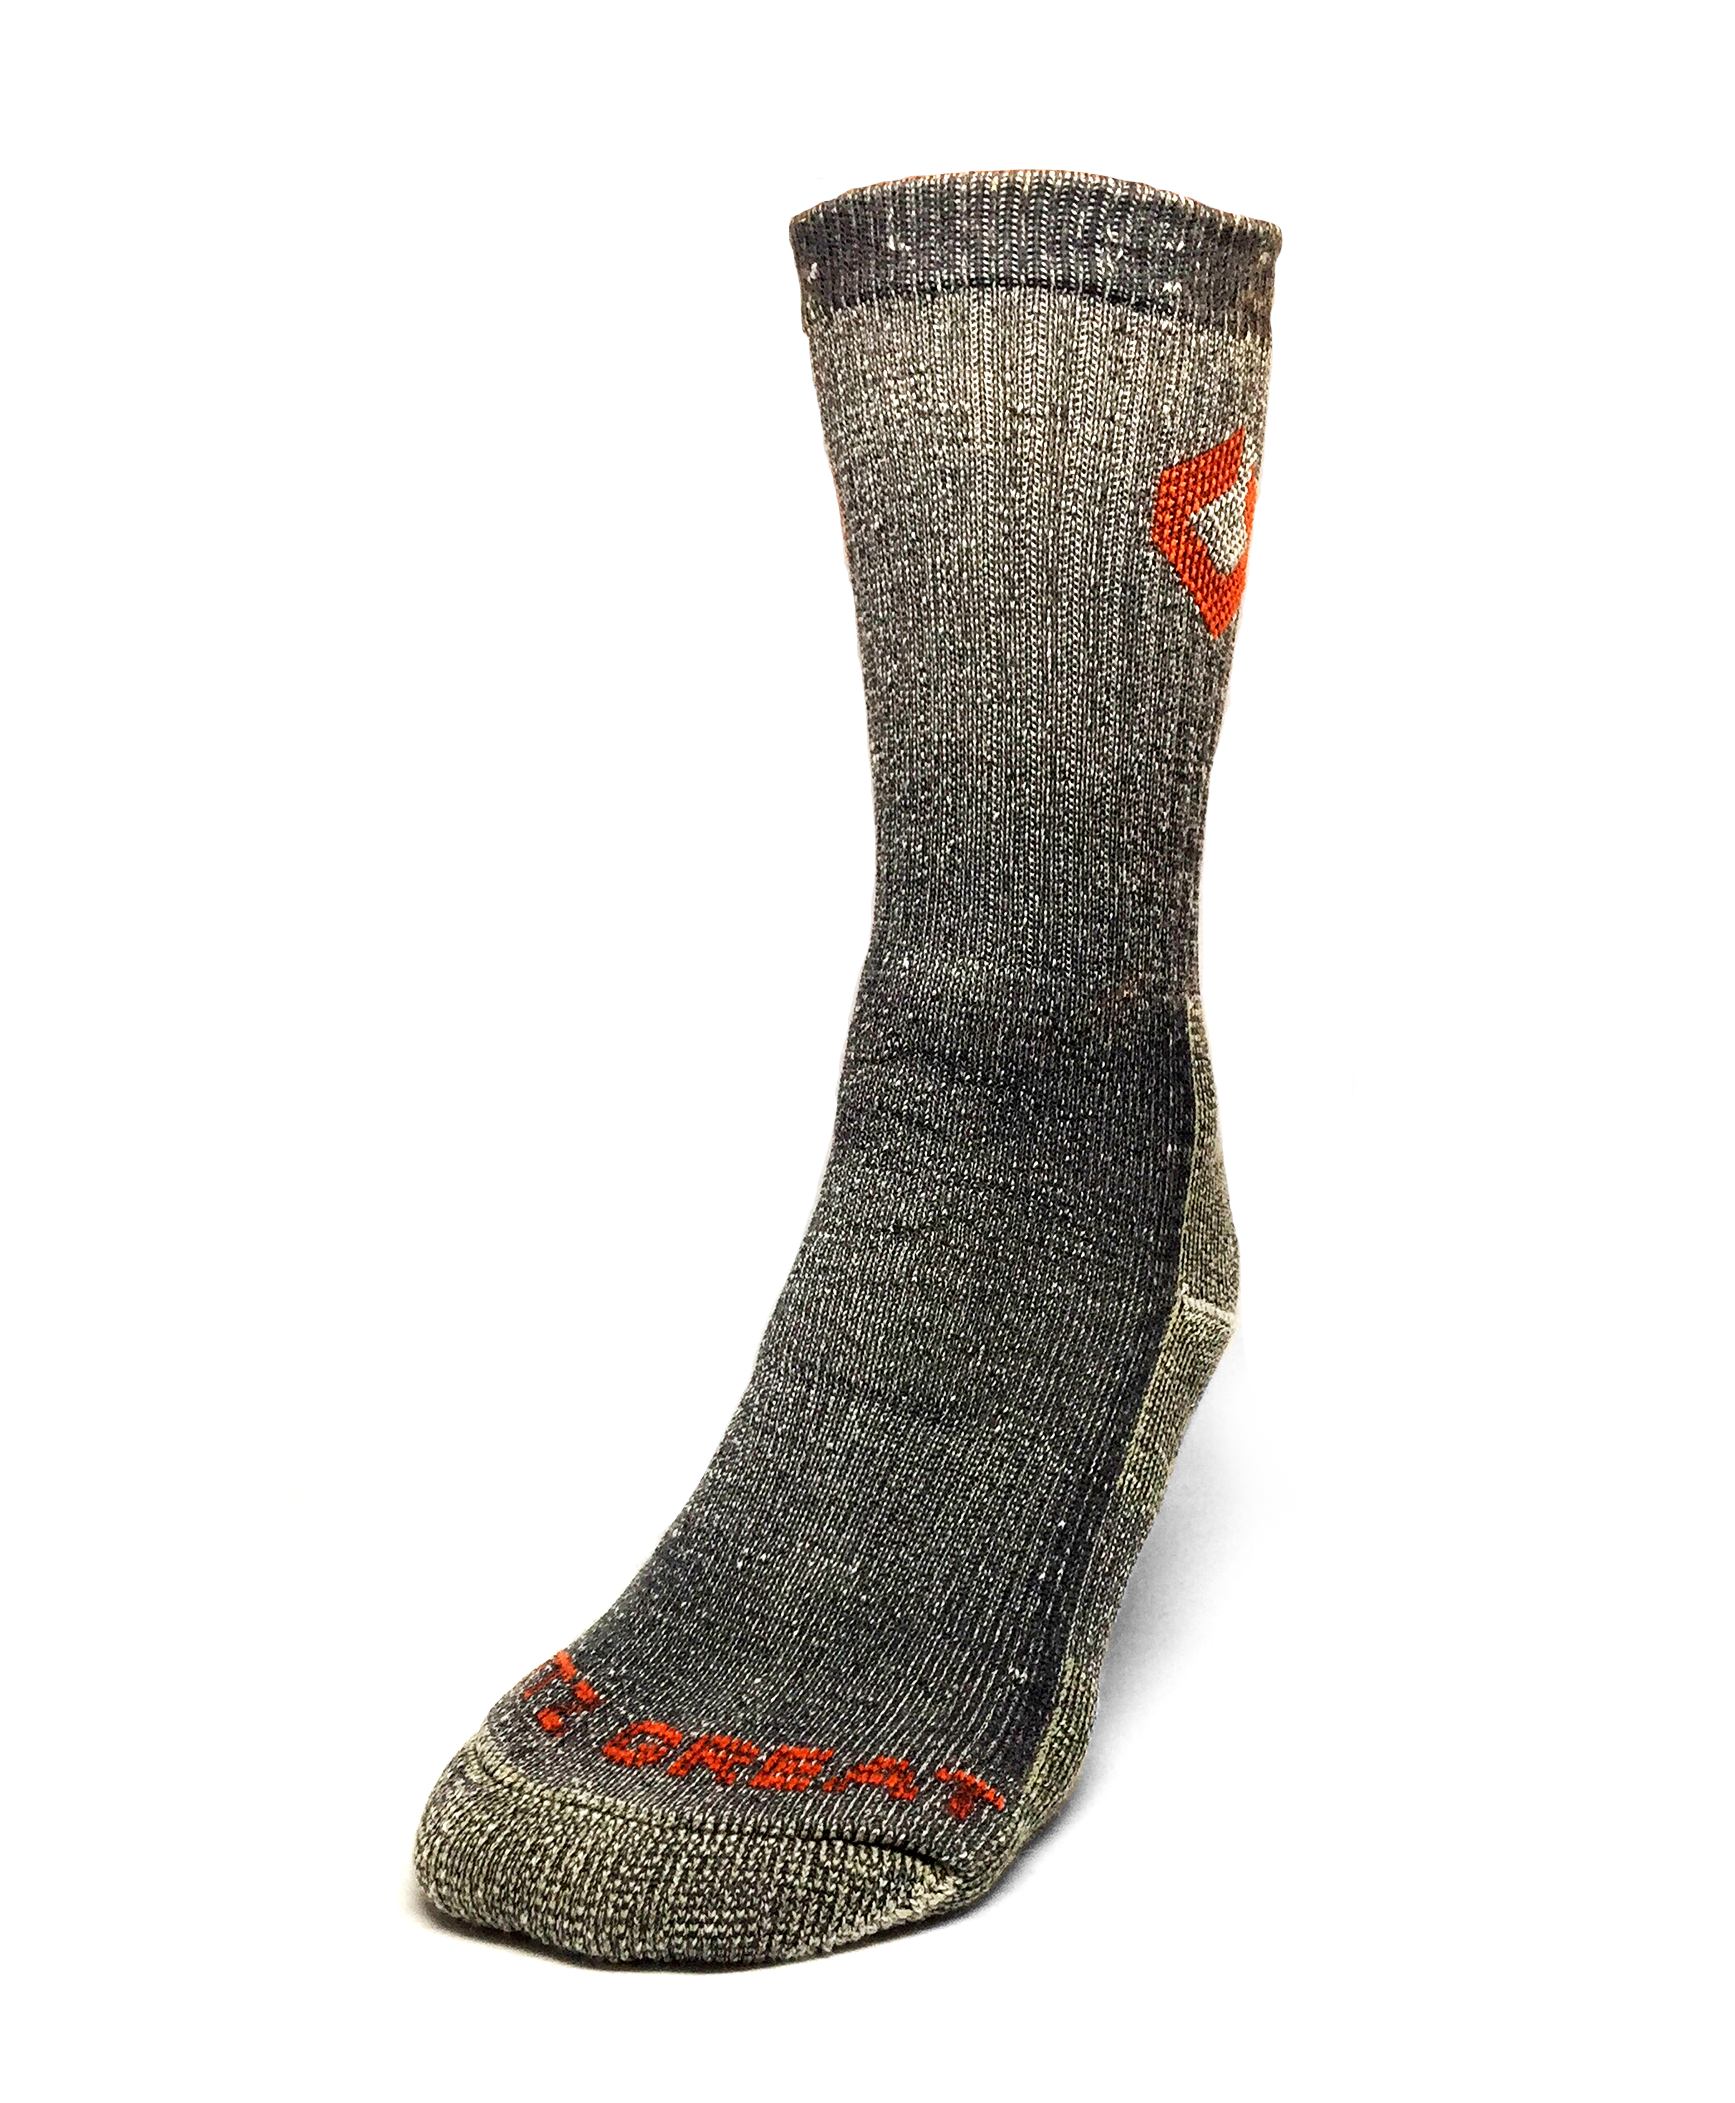 High-Tech Socks with Copptech yarn size 11-12 (1 pair)